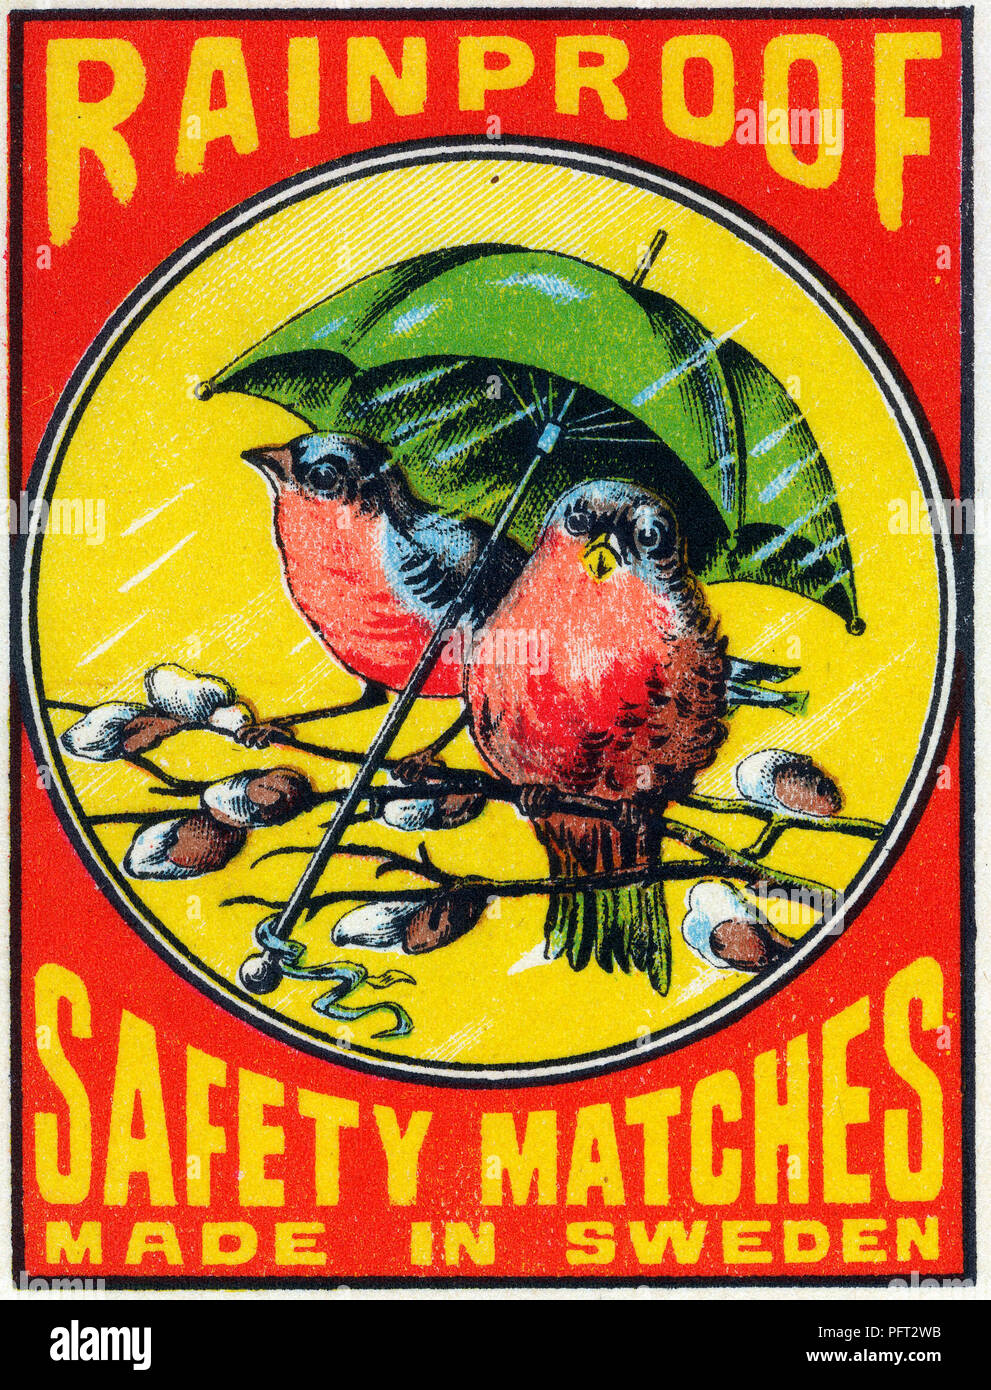 Antique safety matches. The label of this antique matchbox label shows two birds sitting under an umbrella to avoid the rain. The text says Rainproof safety matches. Made in Sweden. Stock Photo